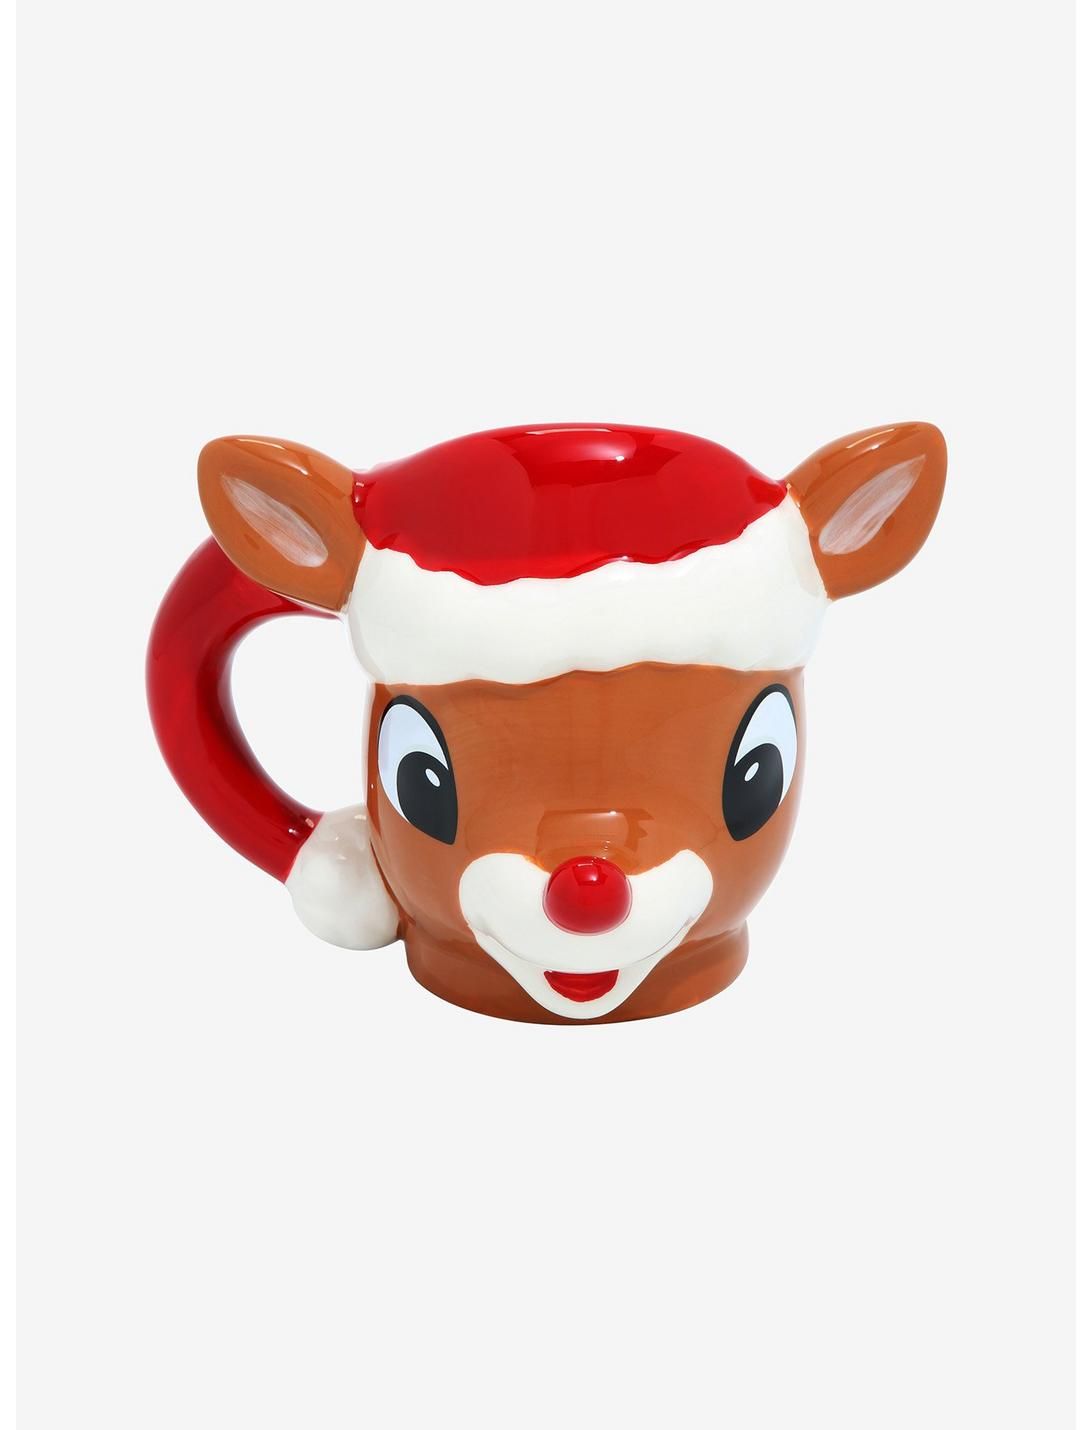 Rudolph The Red-Nosed Reindeer Sculpted Mug | Hot Topic